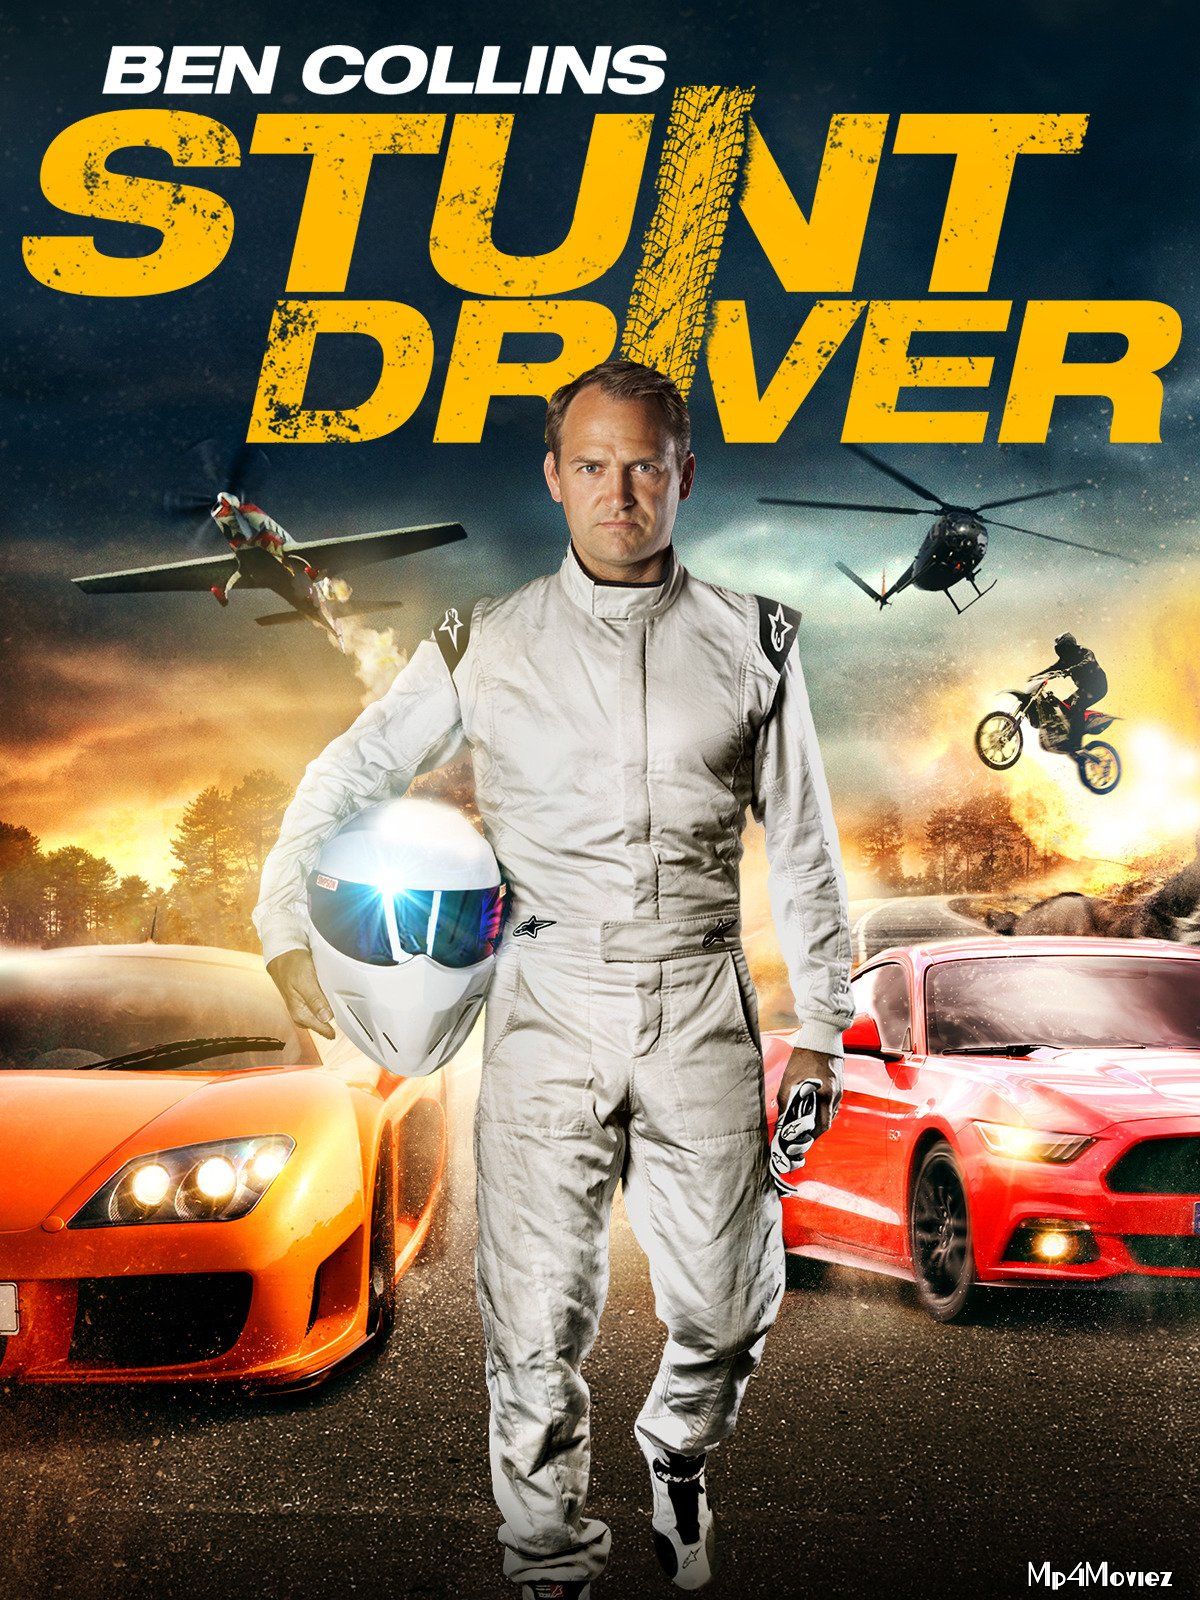 Ben Collins Stunt Driver 2015 Hindi Dubbed Full Movie download full movie